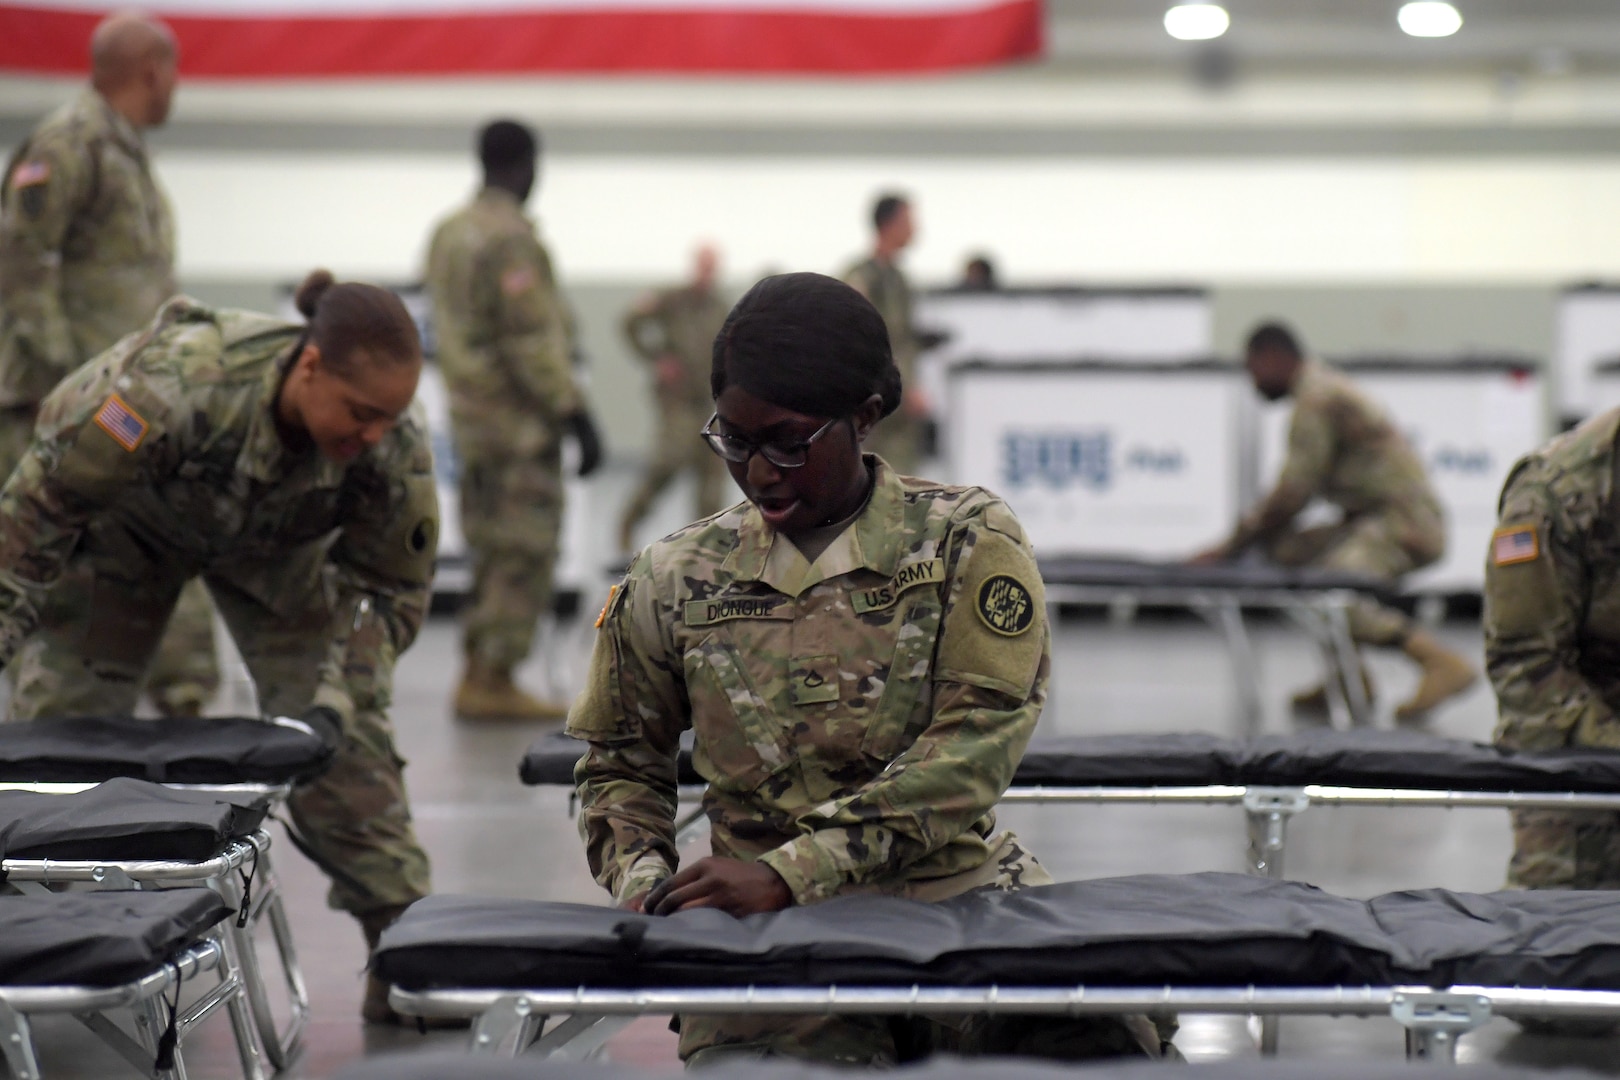 Army Pfc. NDeye Diongue, assigned to the Maryland Army National Guard’s 1297th Support Battalion, assembles a cot and bedding as she and other Soldiers set up a federal medical station in the Baltimore Convention CenterMarch 28, 2020. The station was set up to alleviate possible overcrowding at area hospitals as a result of the COVID-19 outbreak.